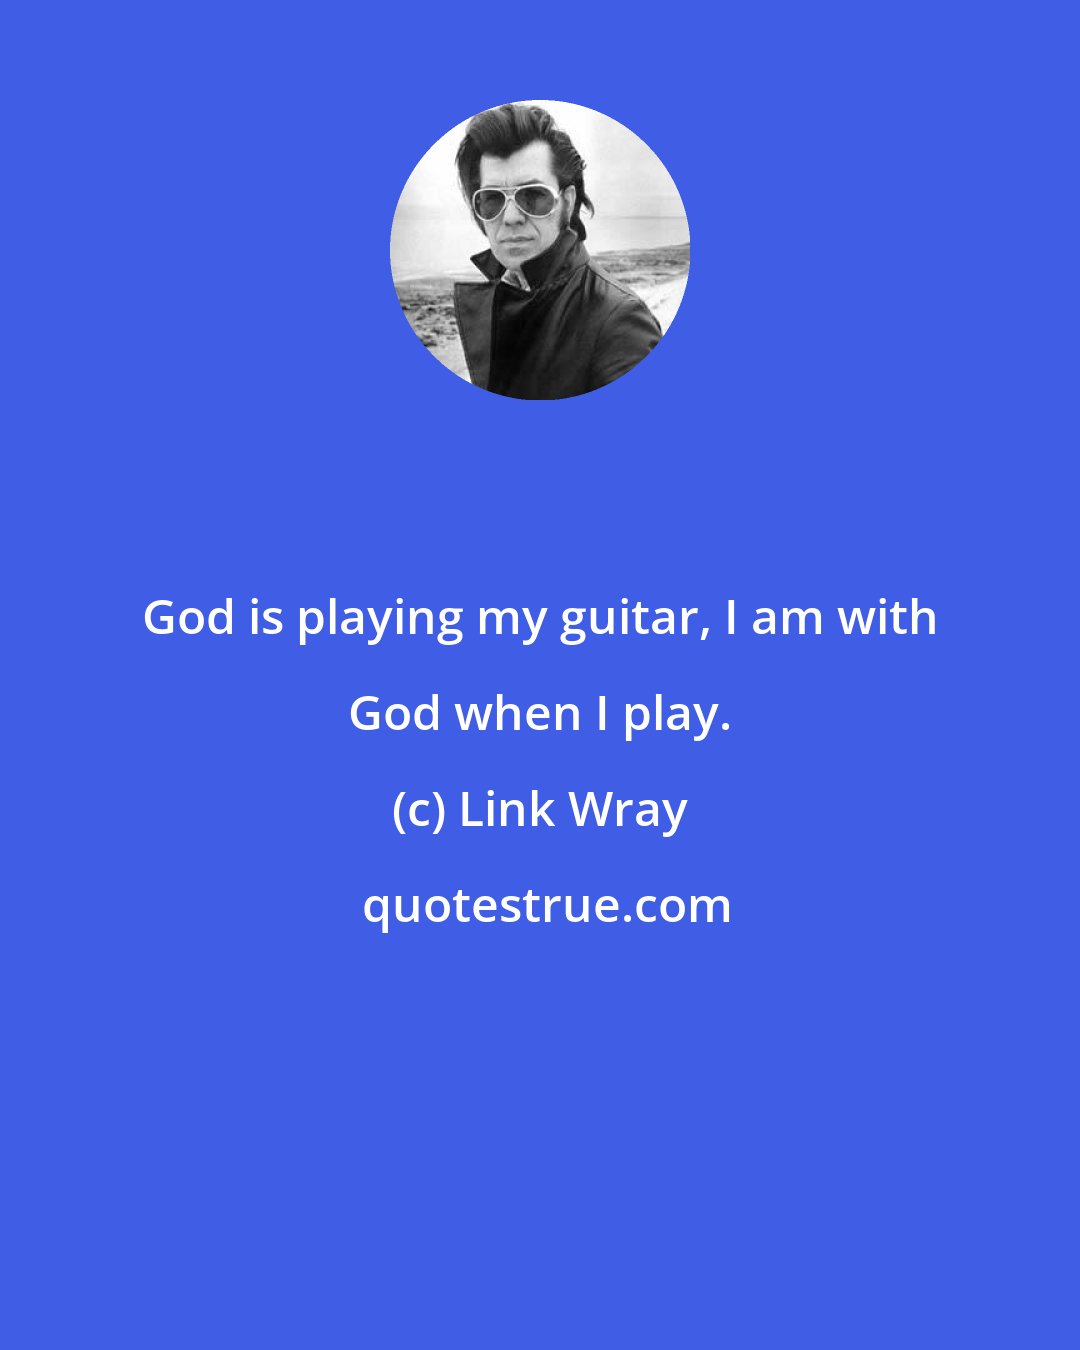 Link Wray: God is playing my guitar, I am with God when I play.